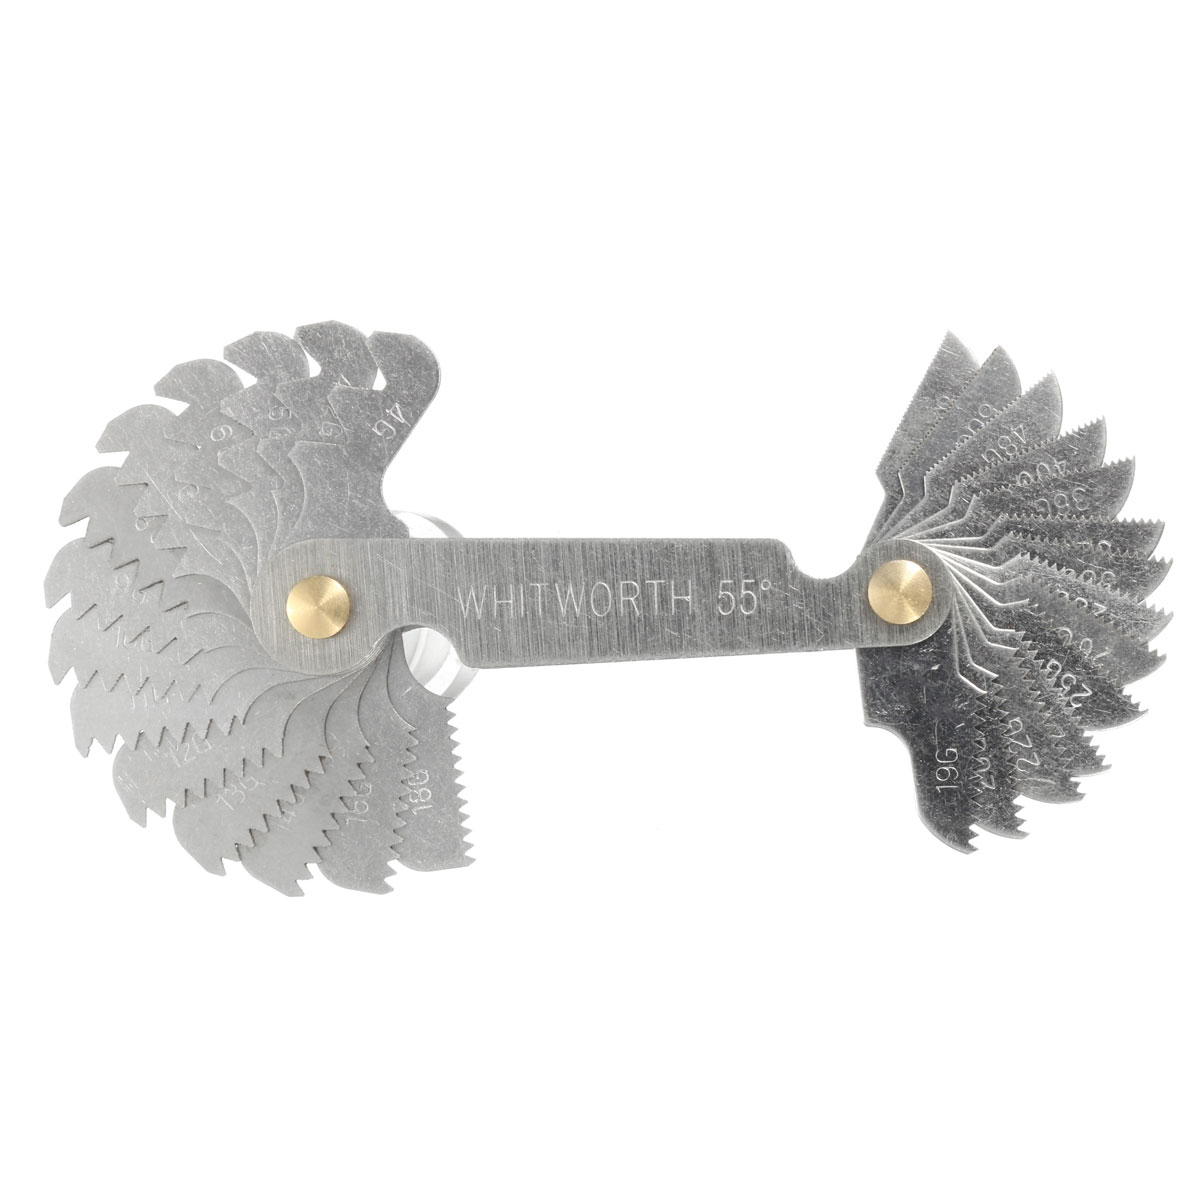 Metric-Whitworth-5560-Degree-Thread-Screw-Pitch-Gauge-With-3x-Centre-Gages-1092555-8